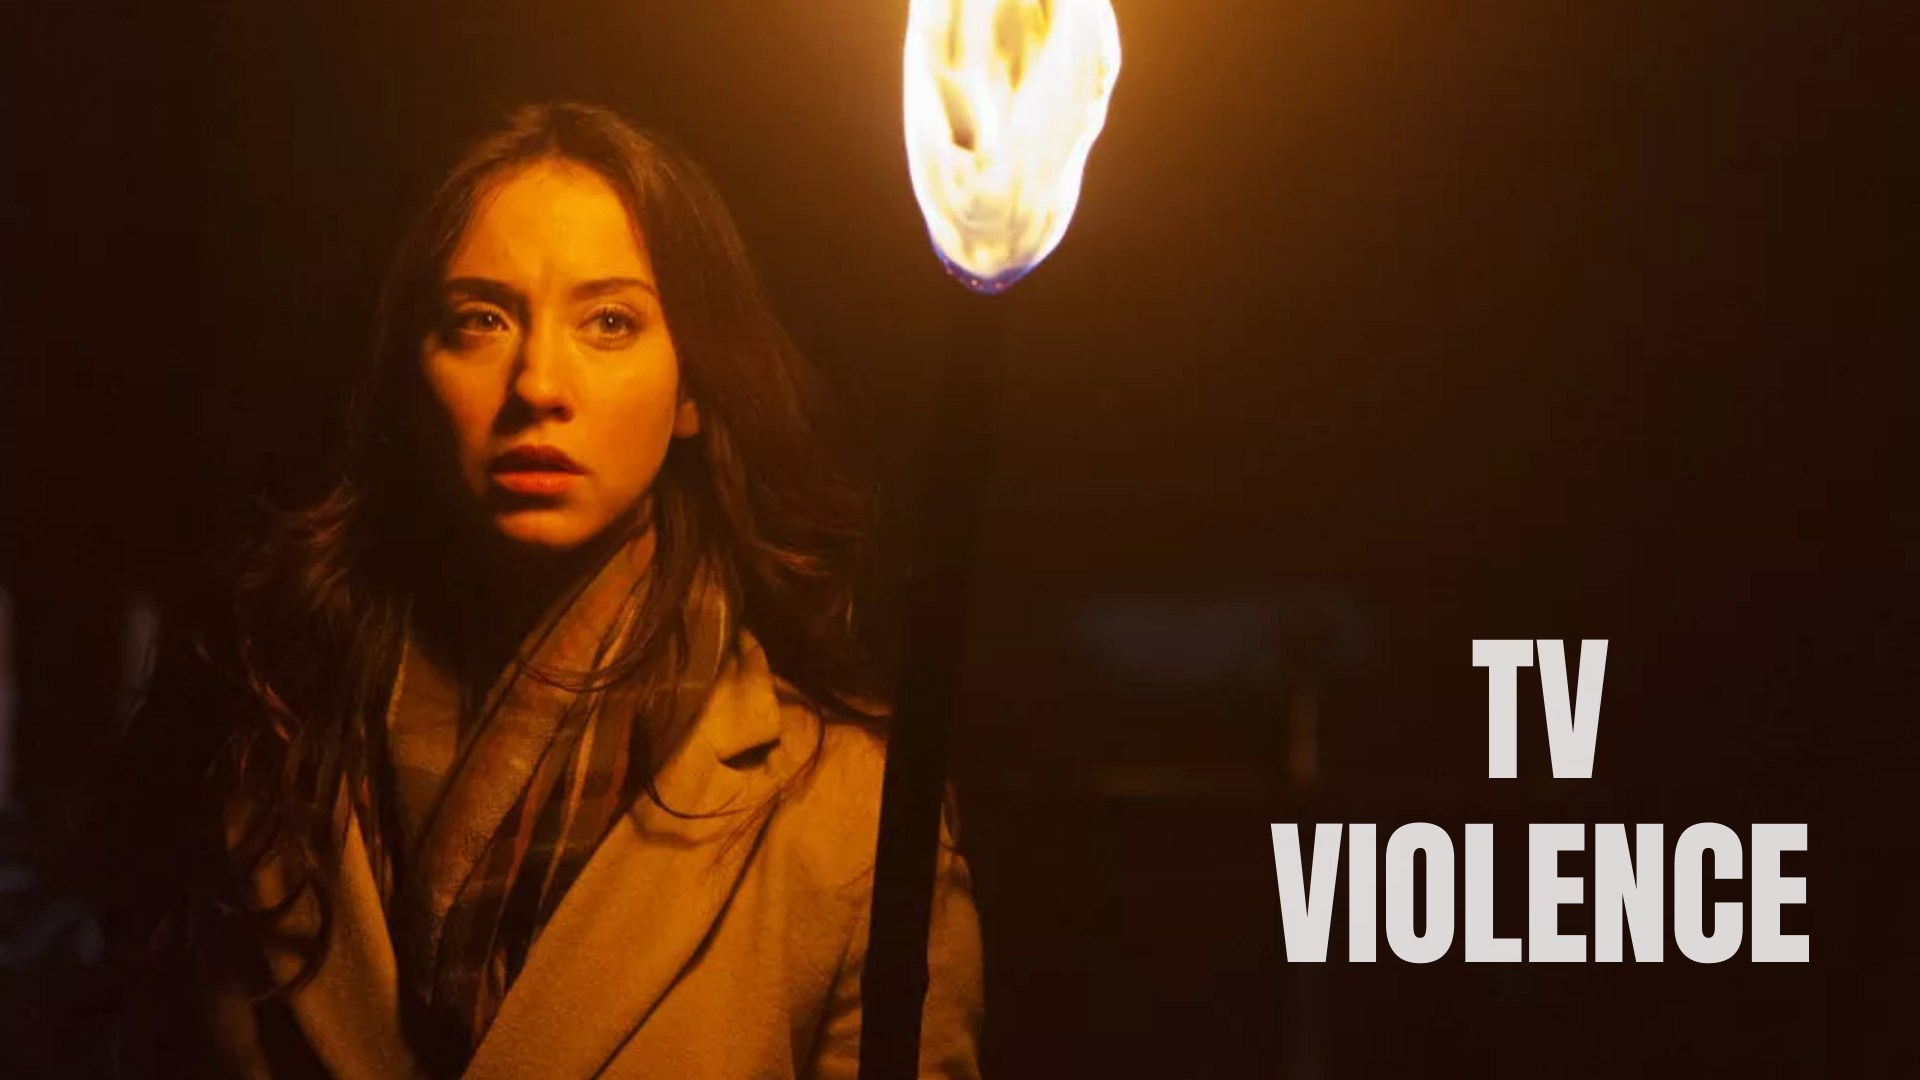 Is Gory TV Exposing Male Violence, or Normalizing It?